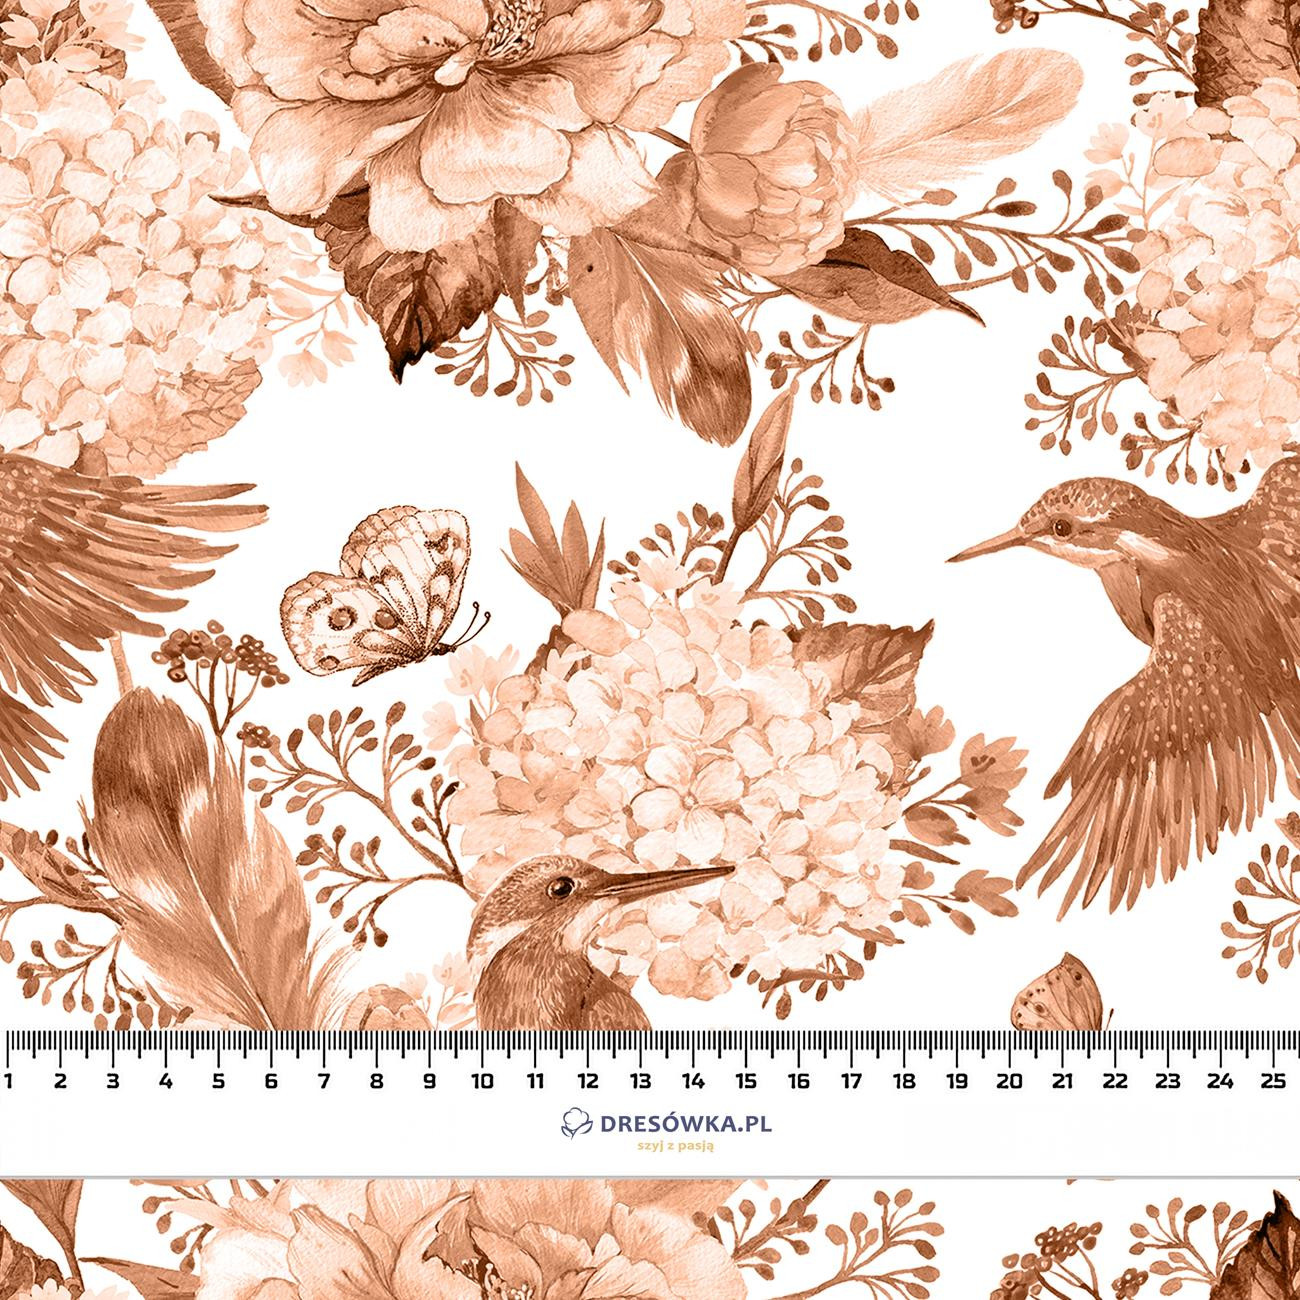 KINGFISHERS AND LILACS (KINGFISHERS IN THE MEADOW) / peach fuzz- Upholstery velour 